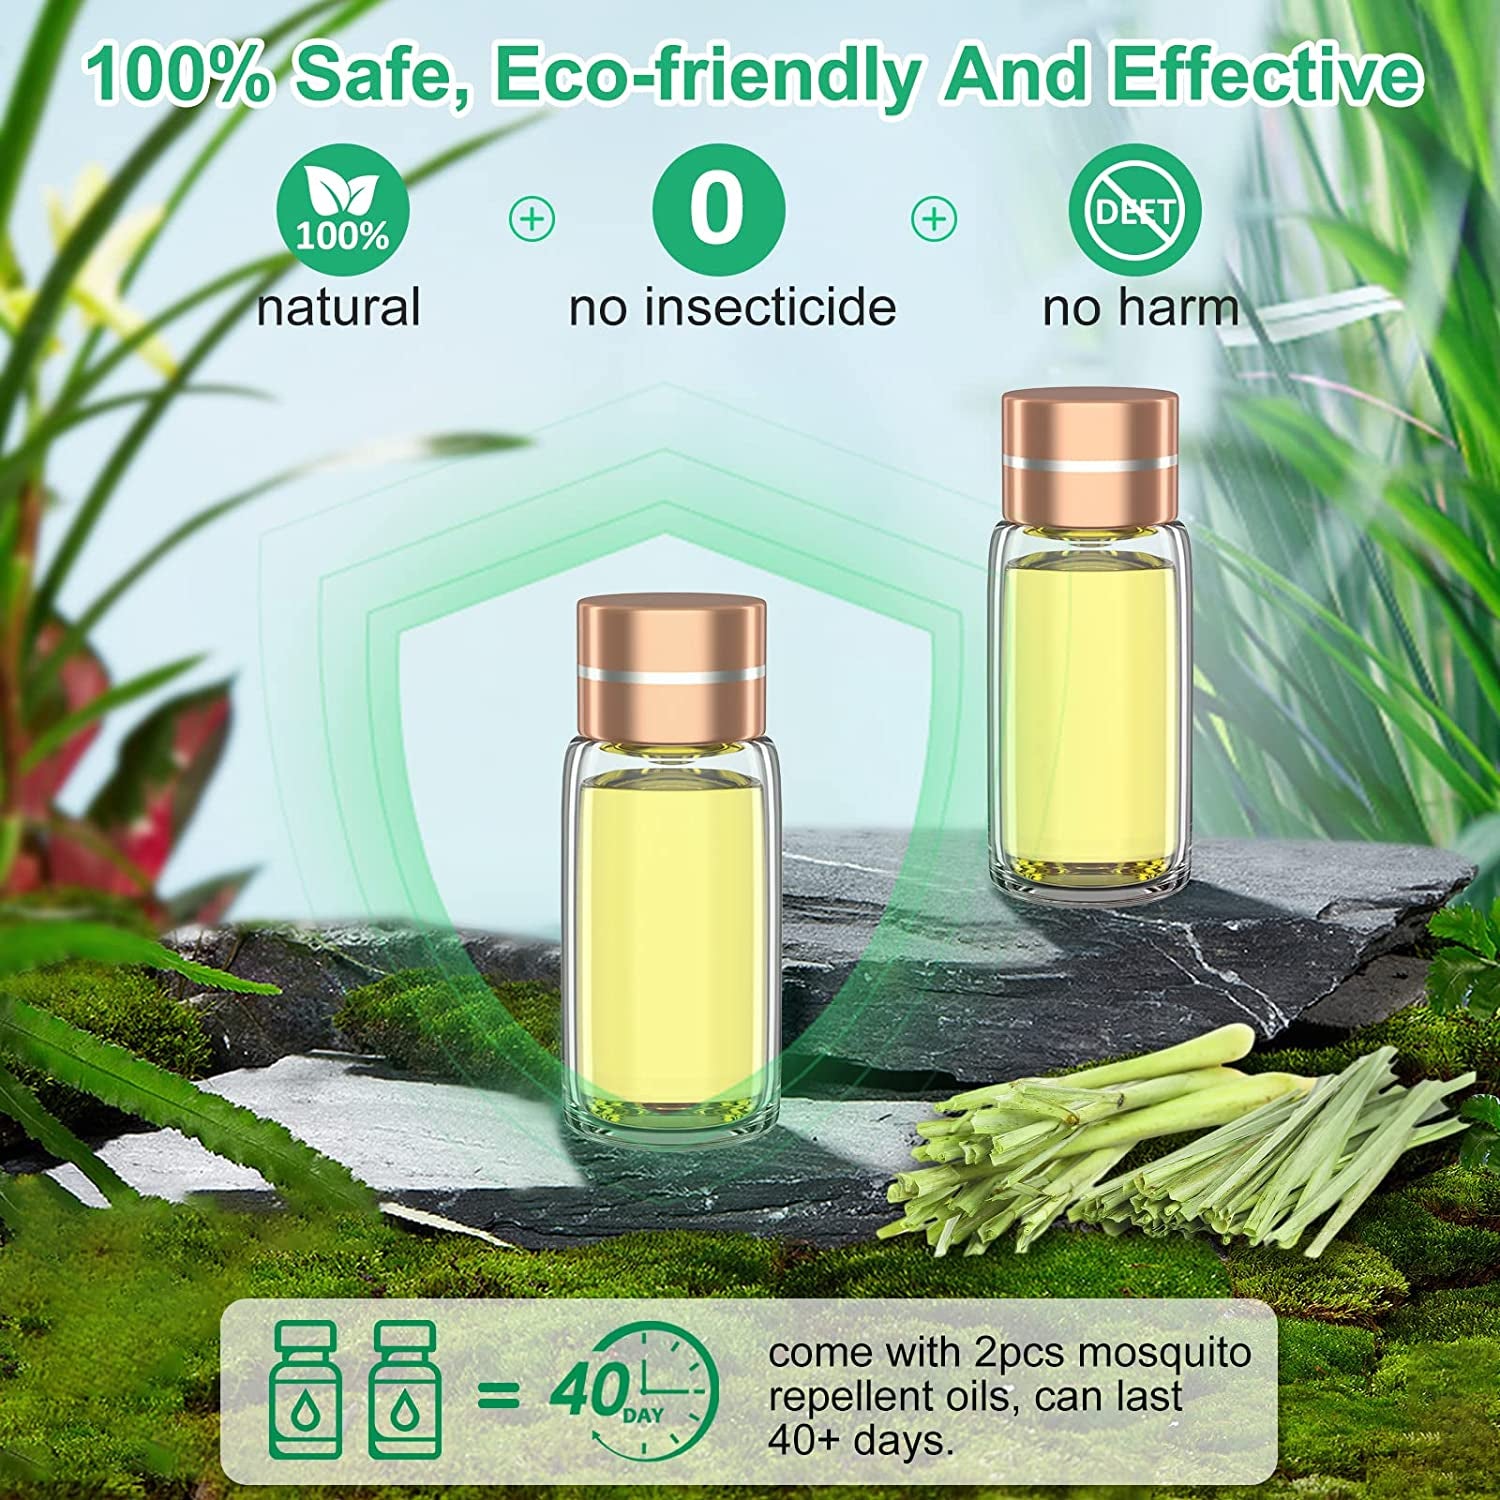 Mosquito Repellent Outdoor, 100% Natural Citronella Oil Mosquito Repeller Indoors [Infant Grade], DEET-Free, Portable Rechargeable Bug Mosquito Control for Patio, Room, Yard, Trip, 2X Refills